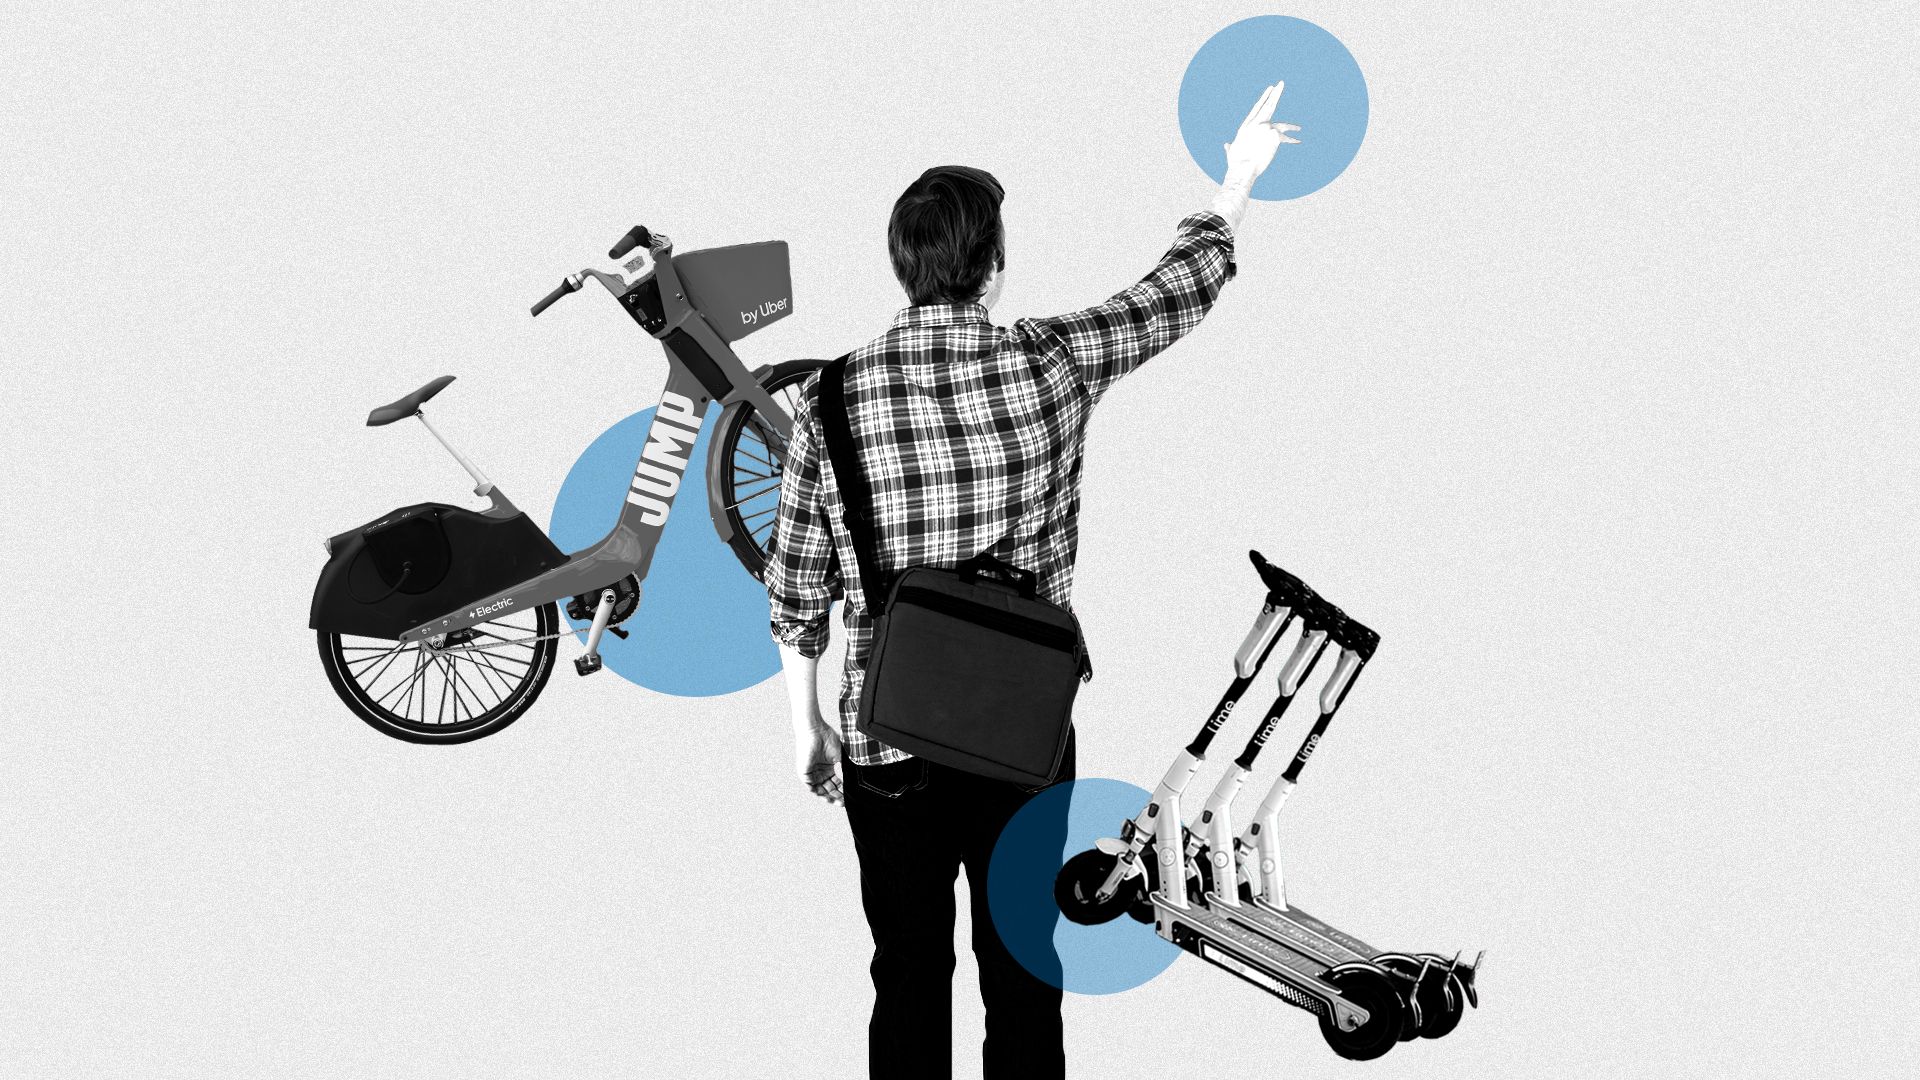 Illustrated collage of a man hailing a cab, a share bike and an e-scooter